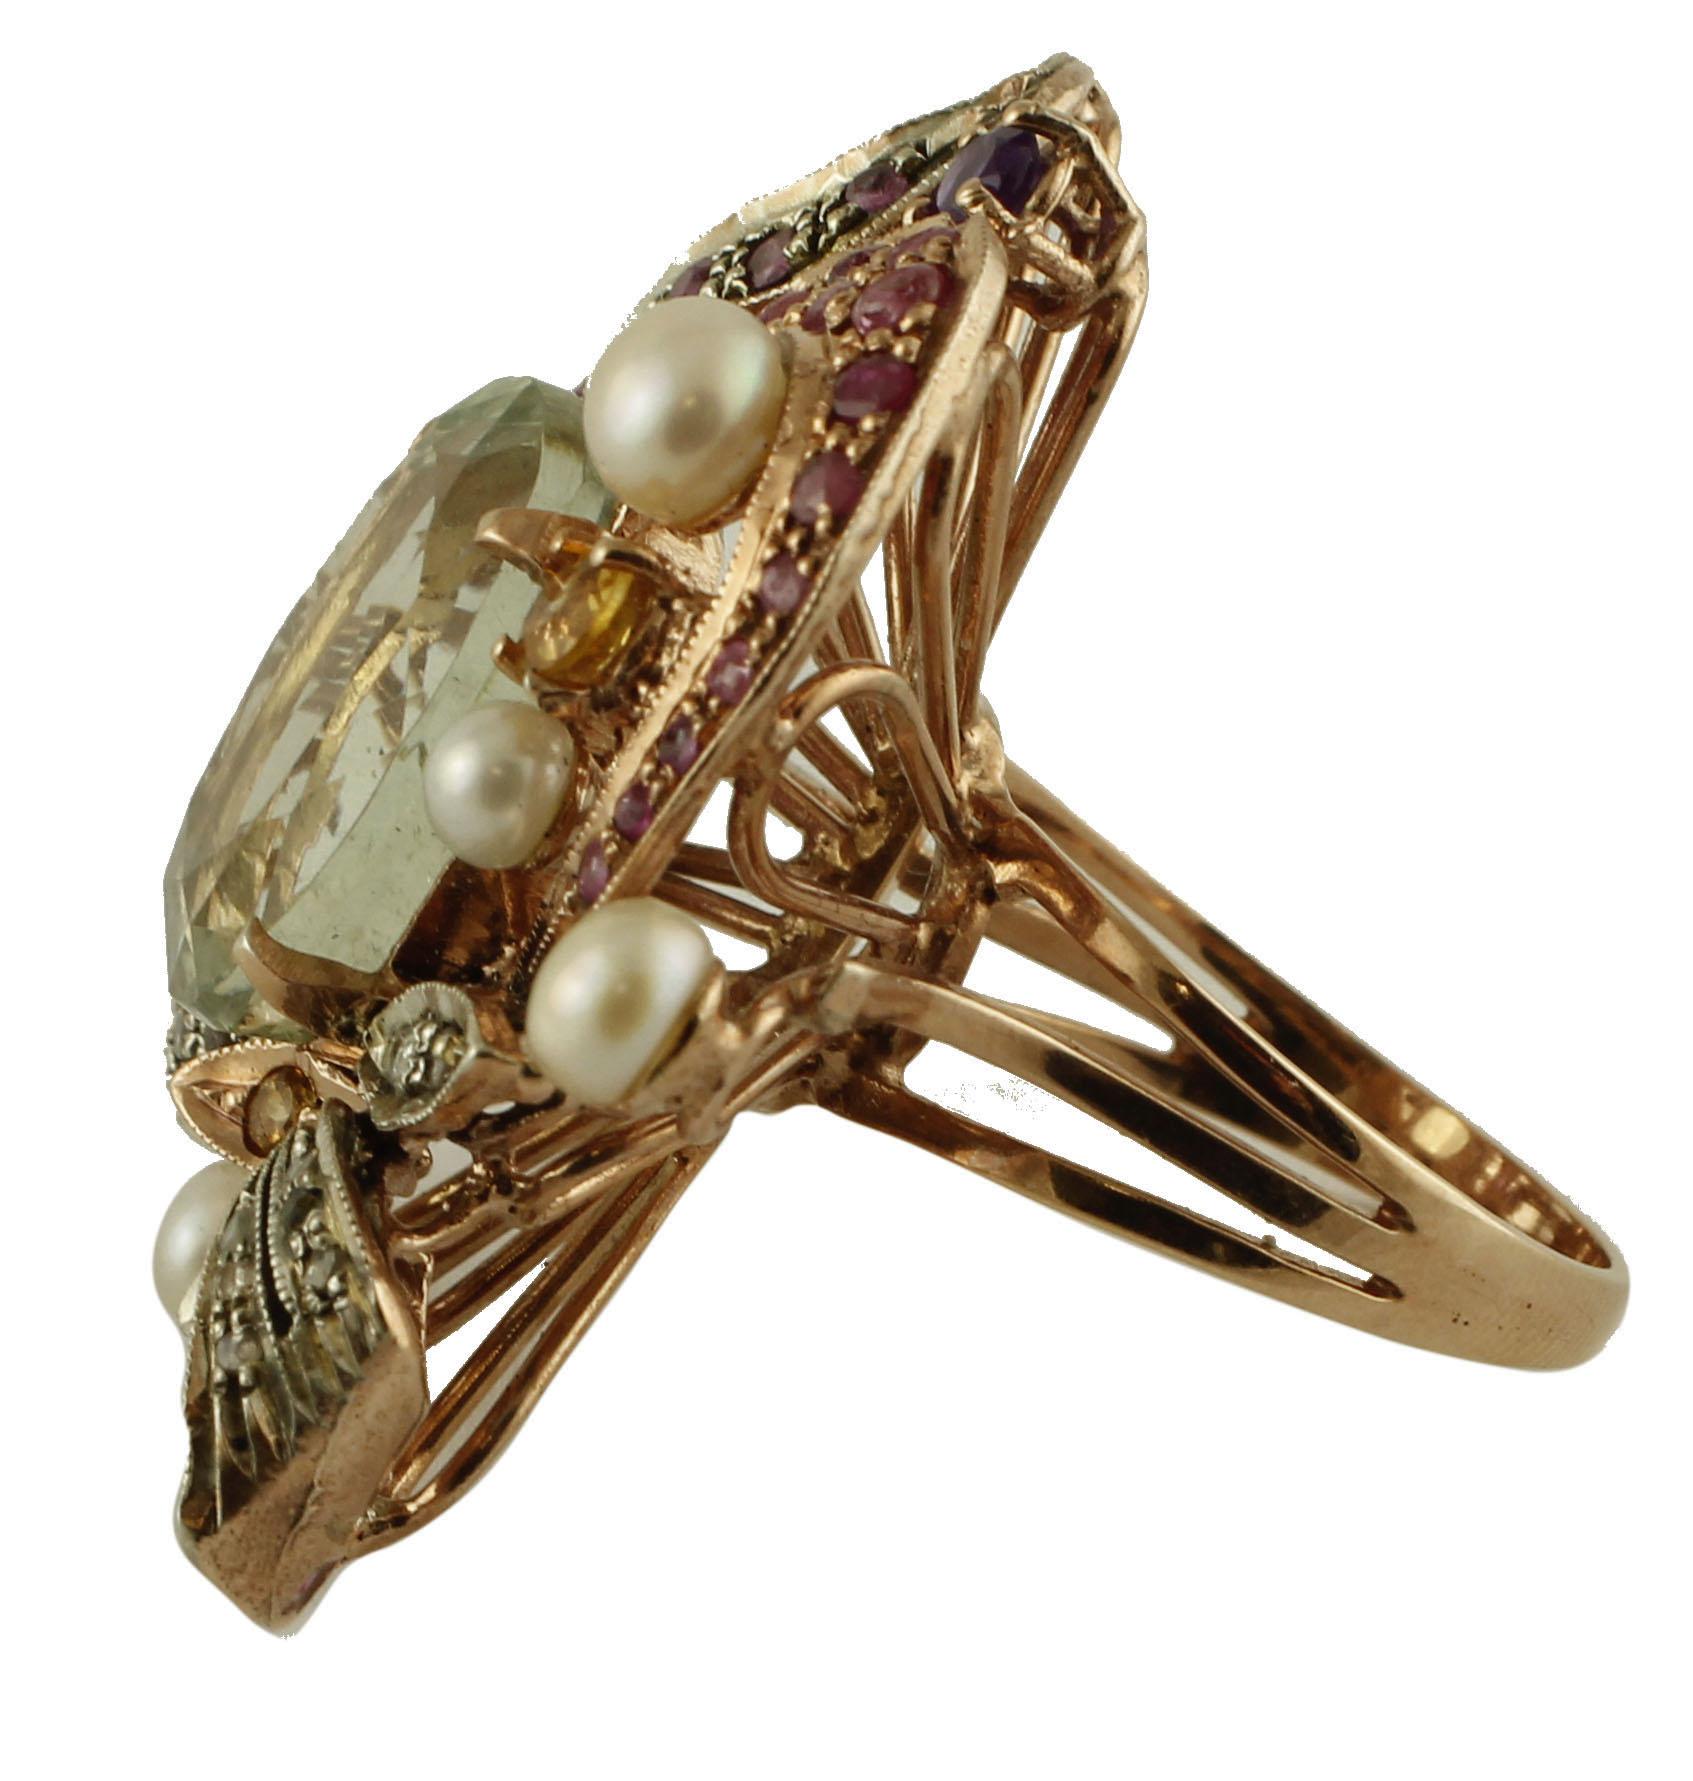 Beautiful cocktail ring in 9k rose gold and silver structure mounted with a central green amethyst surrounded by flowery details in rose gold and silver structure studded with rubies, garnet, topazes and little pearls. 
This ring is totally handmade